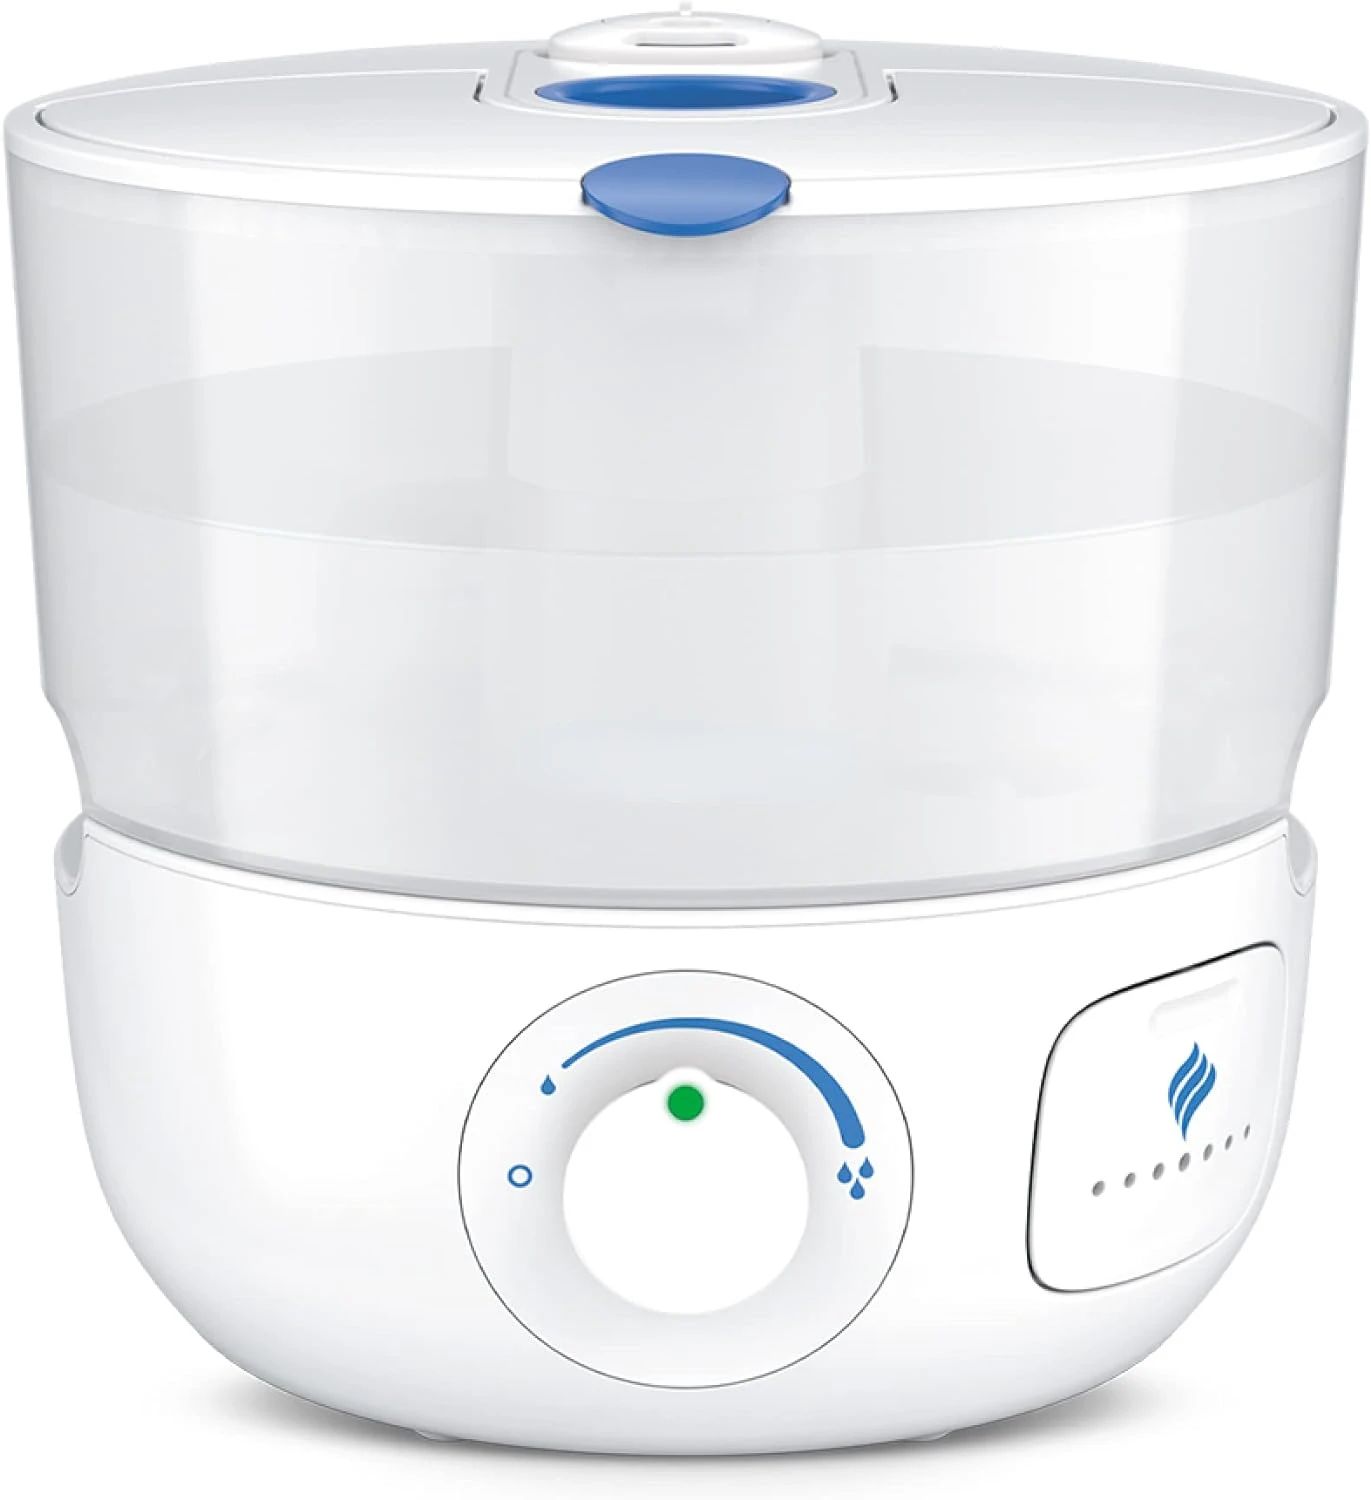 

EasyCare+ Top Fill Filter-Free Cool Mist Humidifier, Small Room\u2013For Vapors 2 Ways \u2013Works with Vicks VapoPads and VapoS